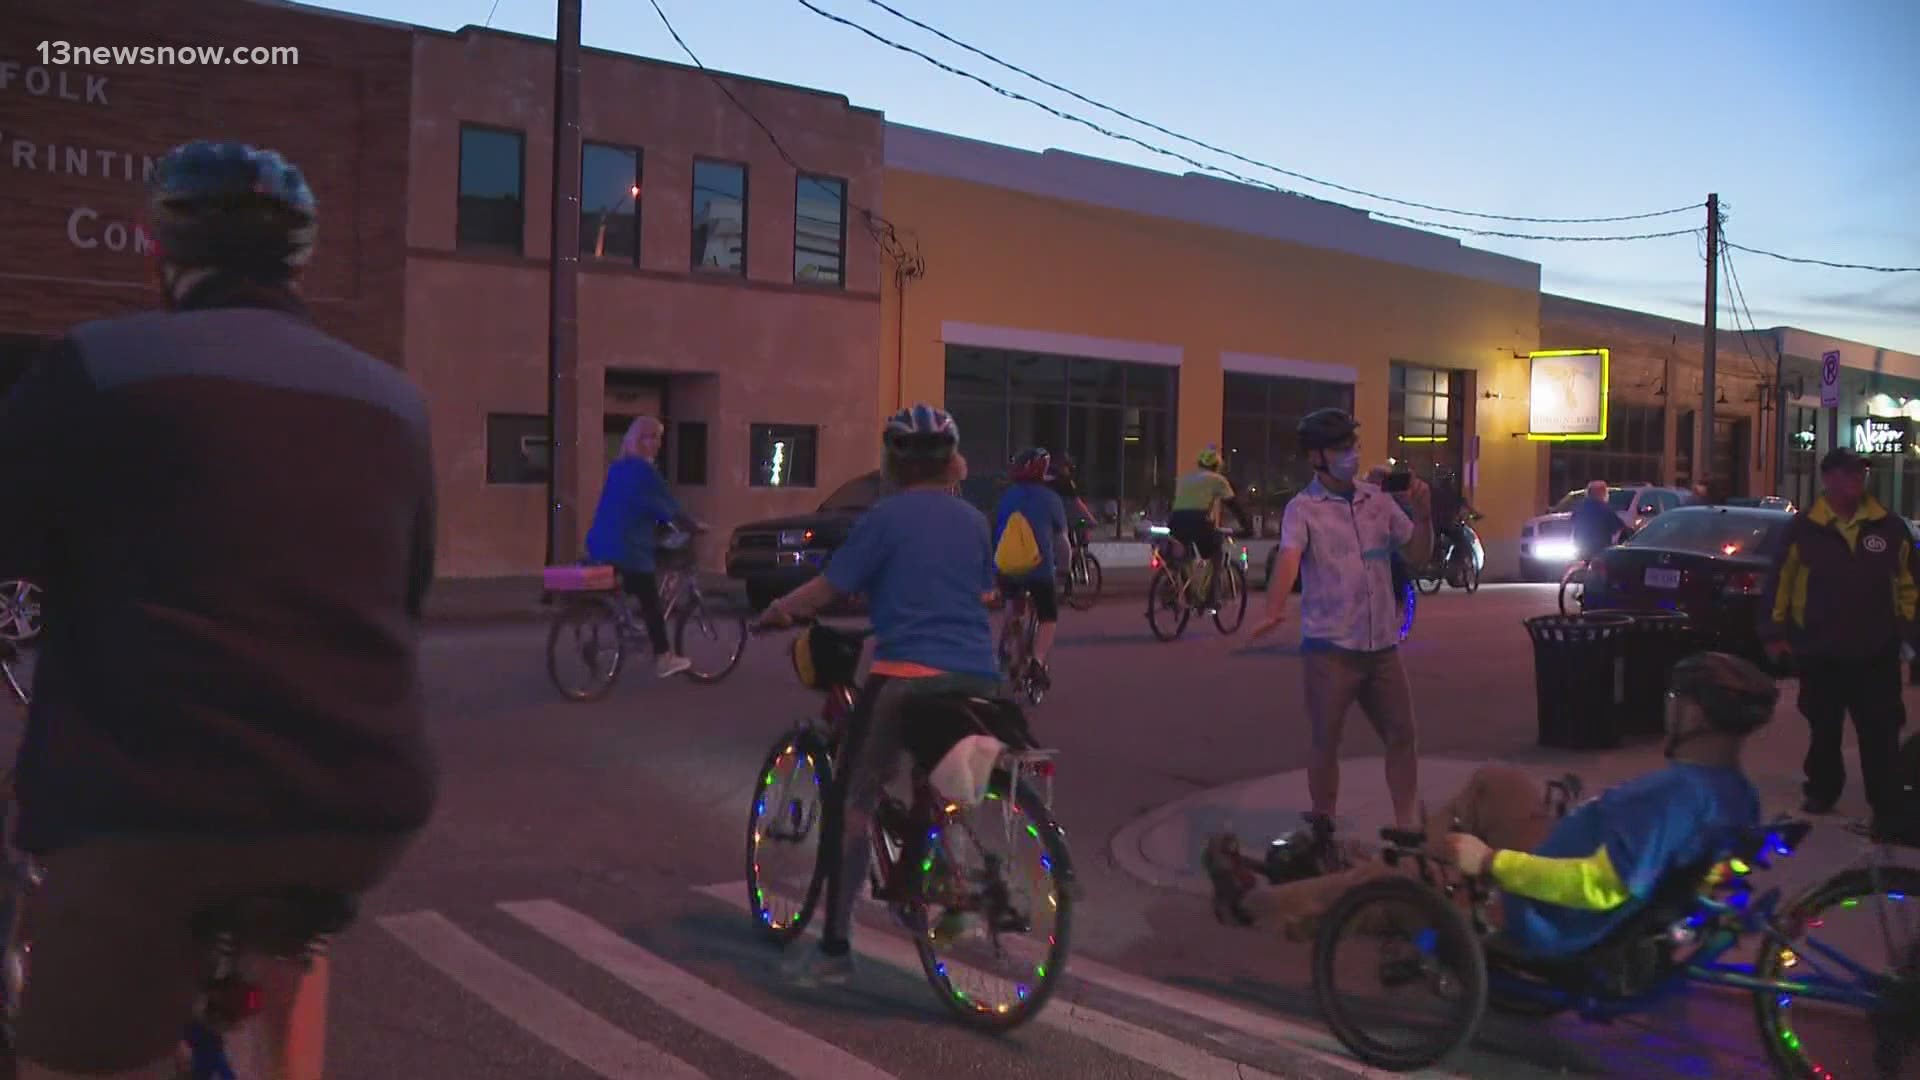 May is National Bike Month and the City of Norfolk is celebrating with special events!